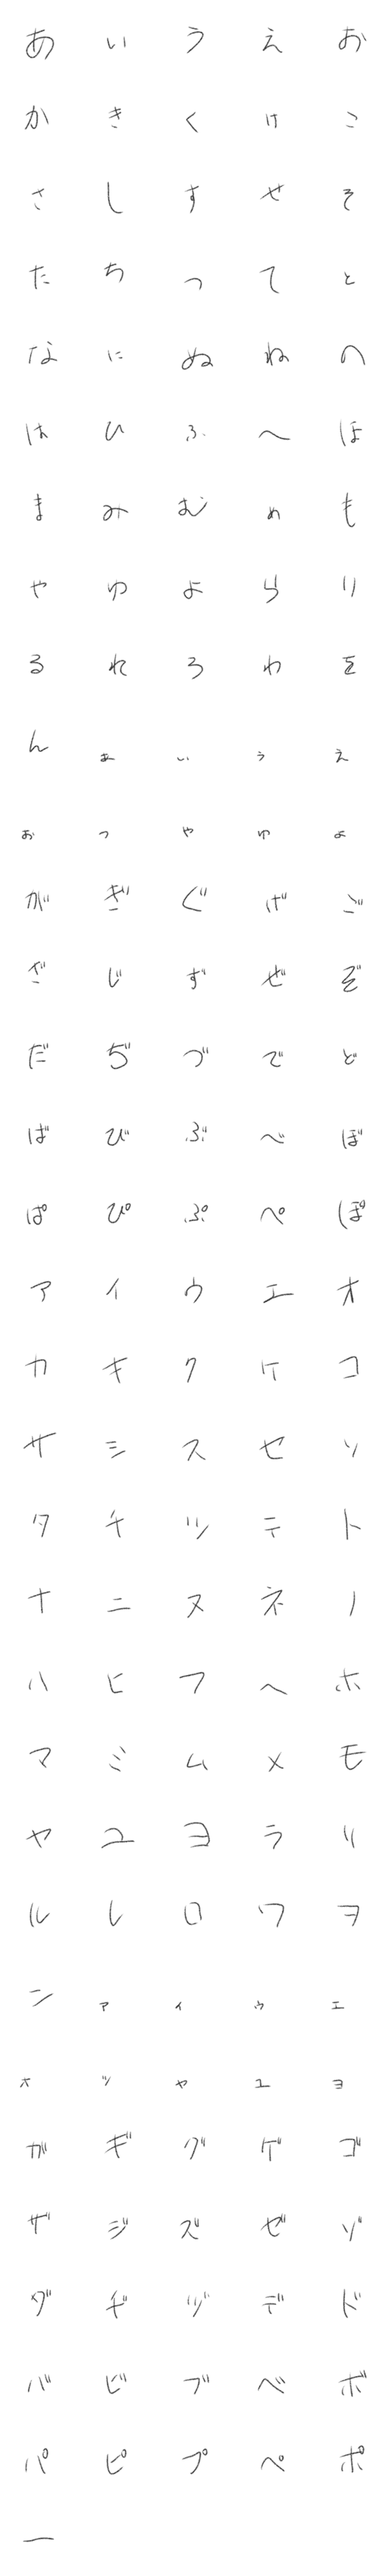 [LINE絵文字]鉛筆で急いでメモ書き 文字セットの画像一覧